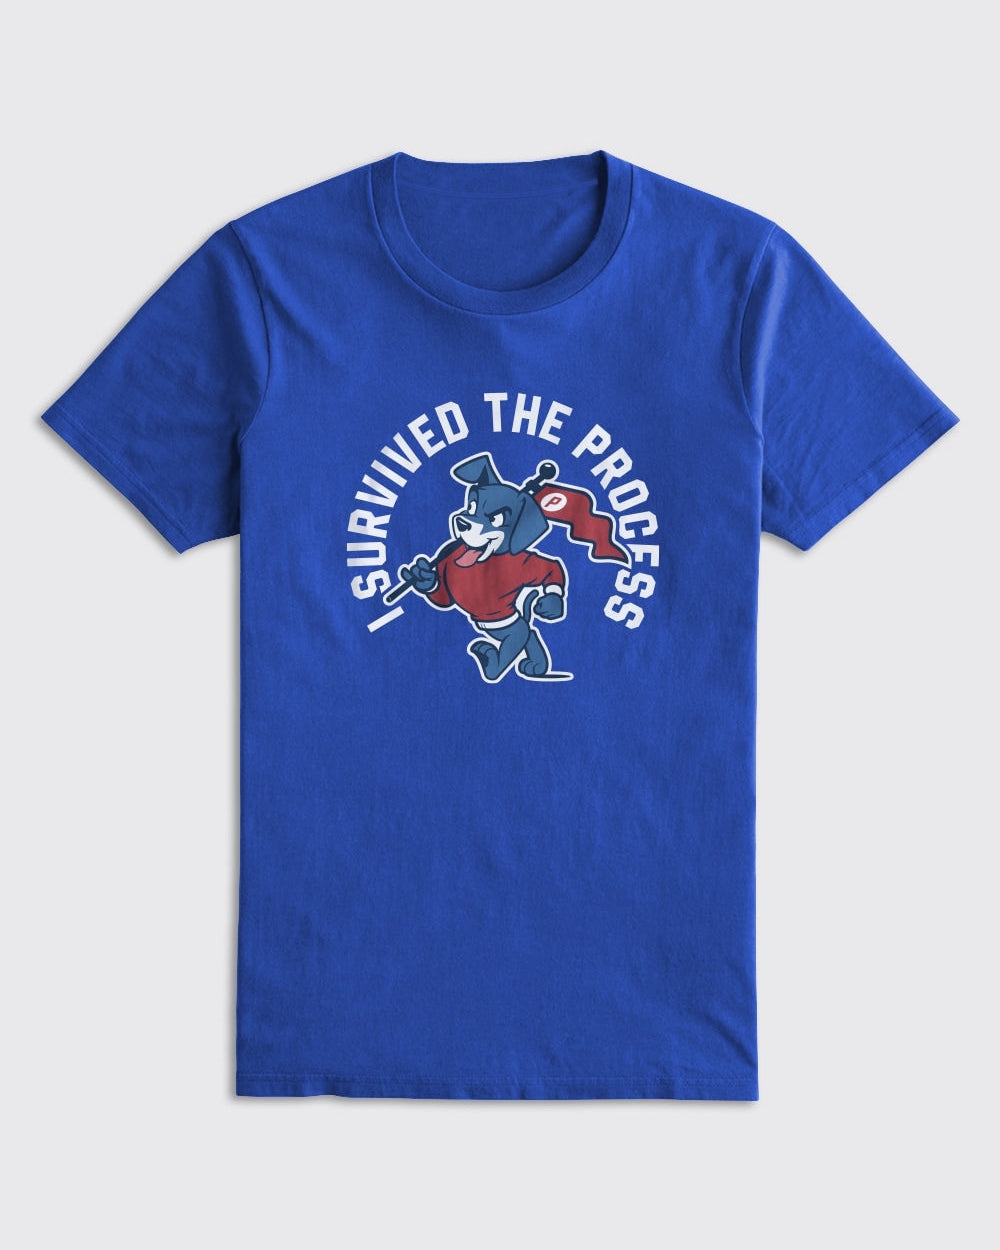 I Survived The Process Shirt - 76ers, T-Shirts - Philly Sports Shirts